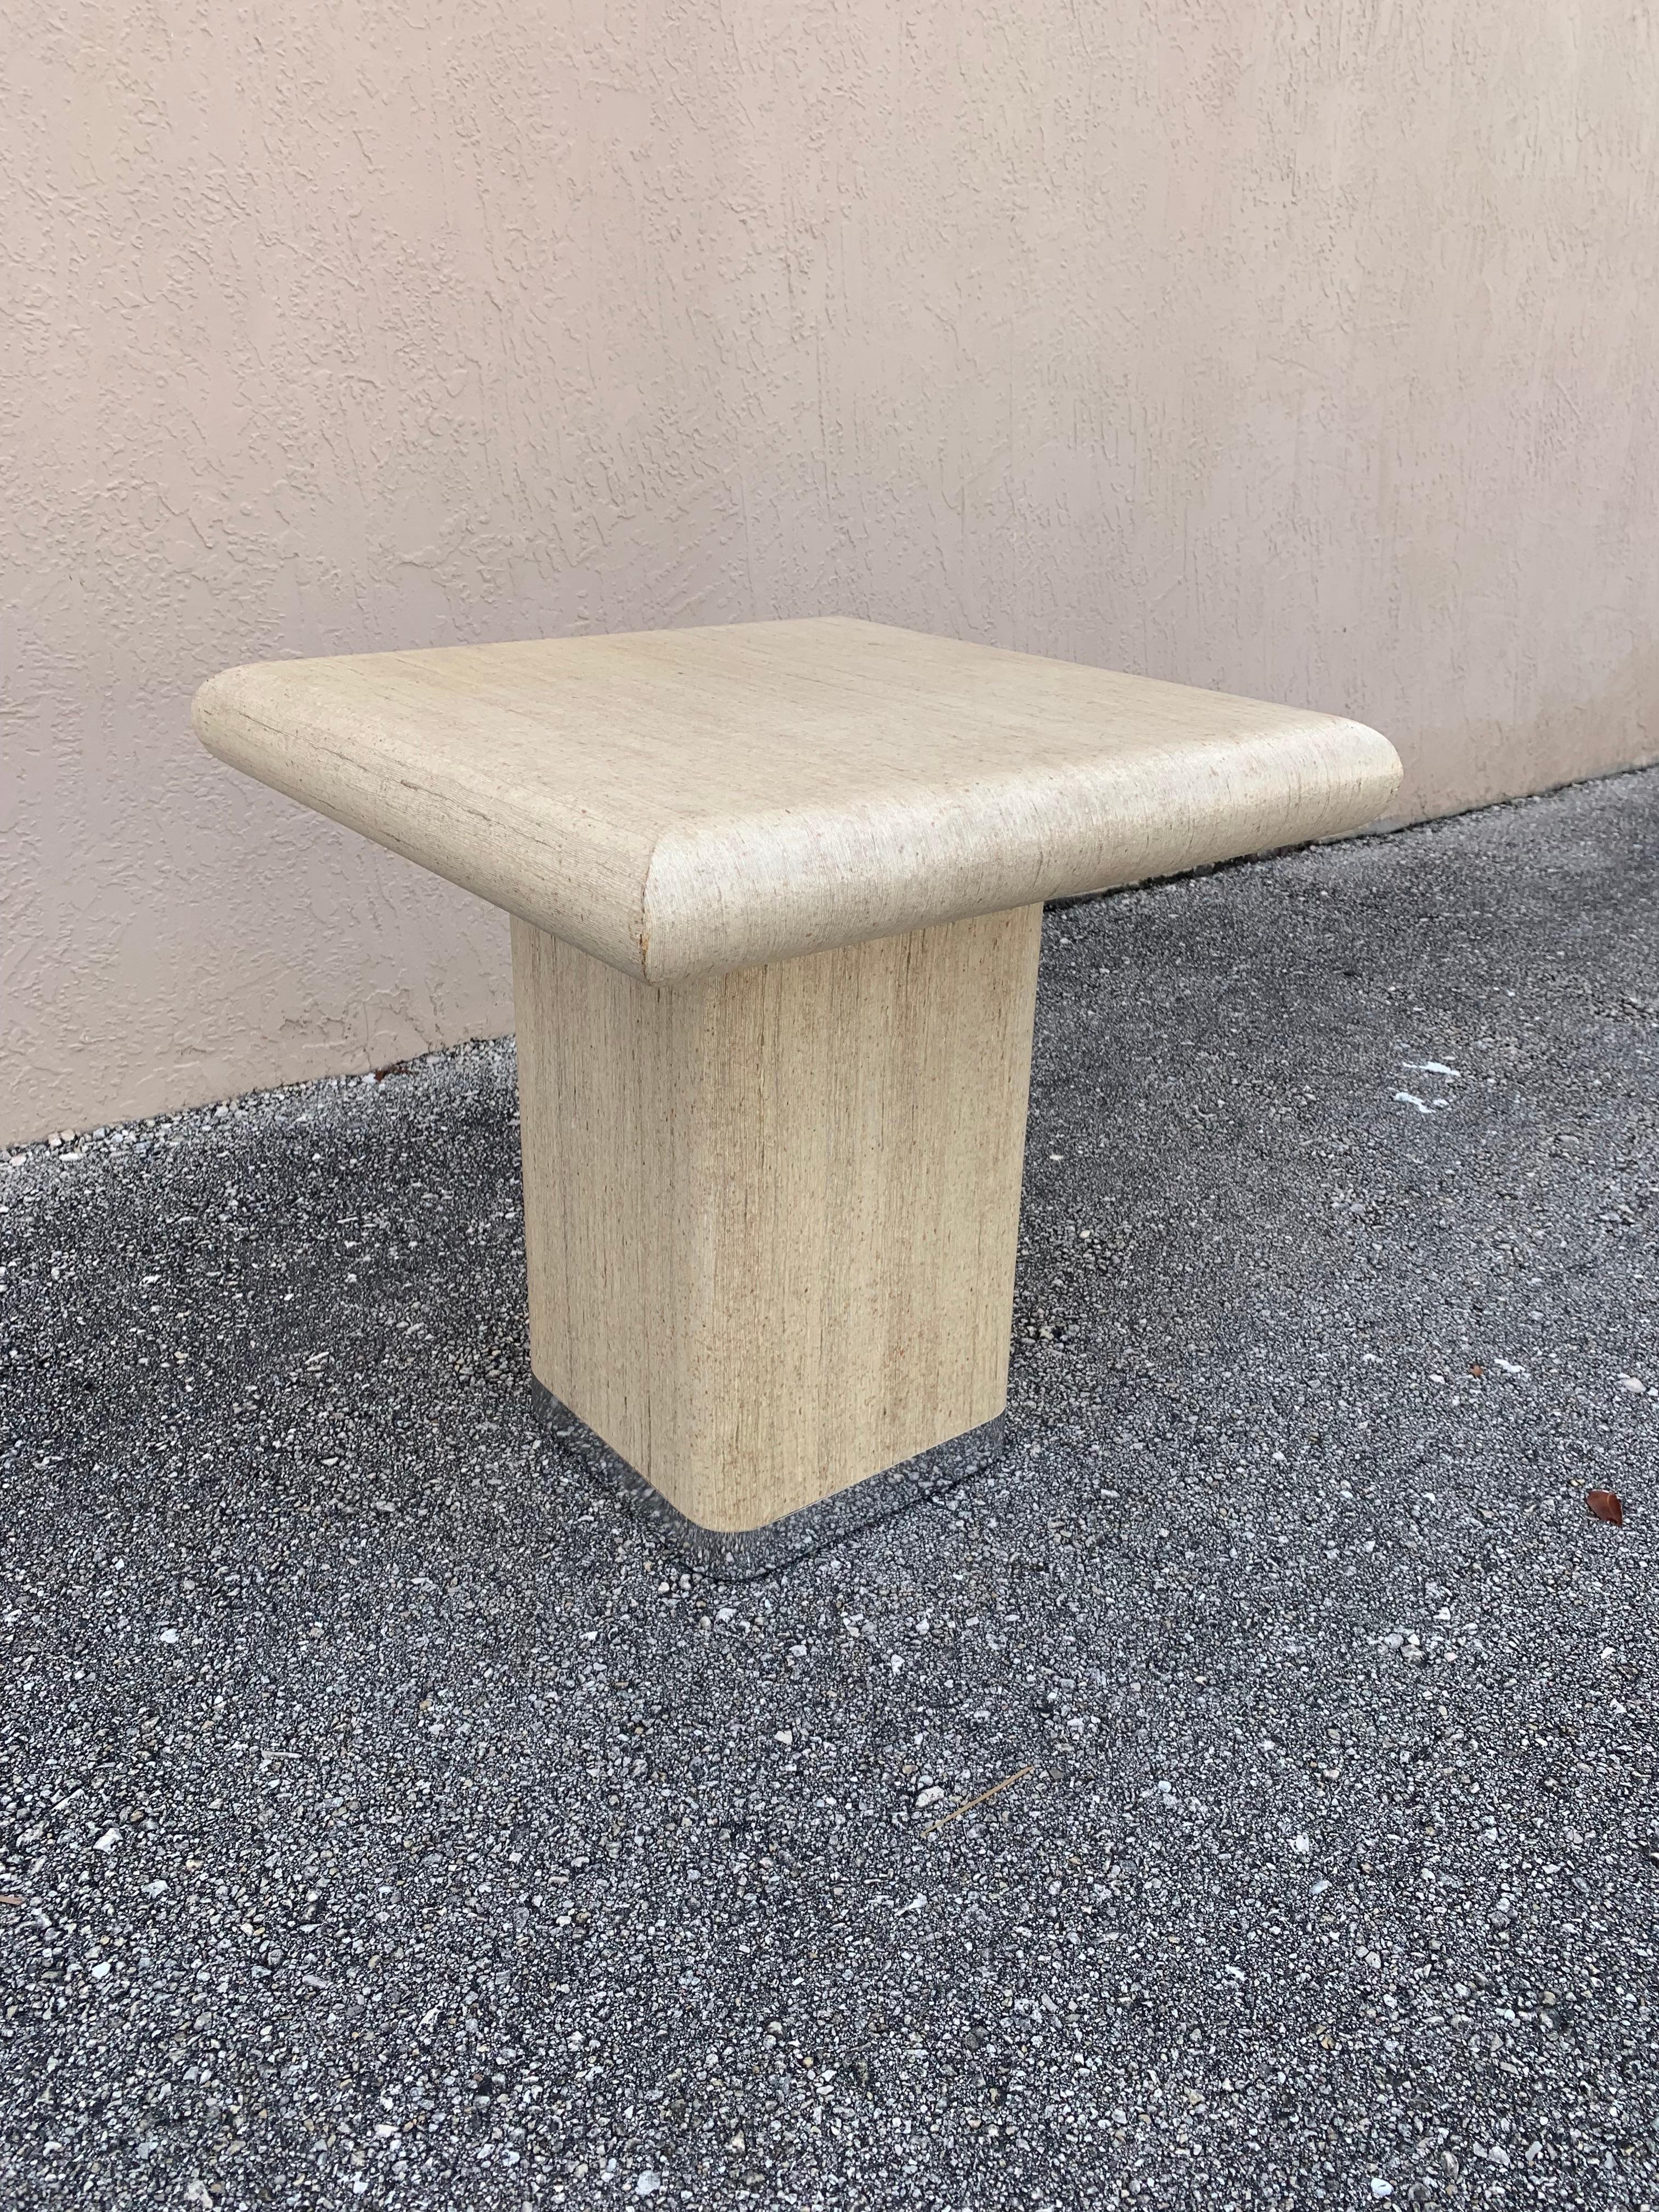 Handsome and elegant side table. Finished in Grasscloth and chrome. Boasting a polished clean neutral look.

Similar to designs of Karl Springer.

Footprint is a perfect cube at 22” tall, 22” wide and 22” deep.

Strong and solid construction and in